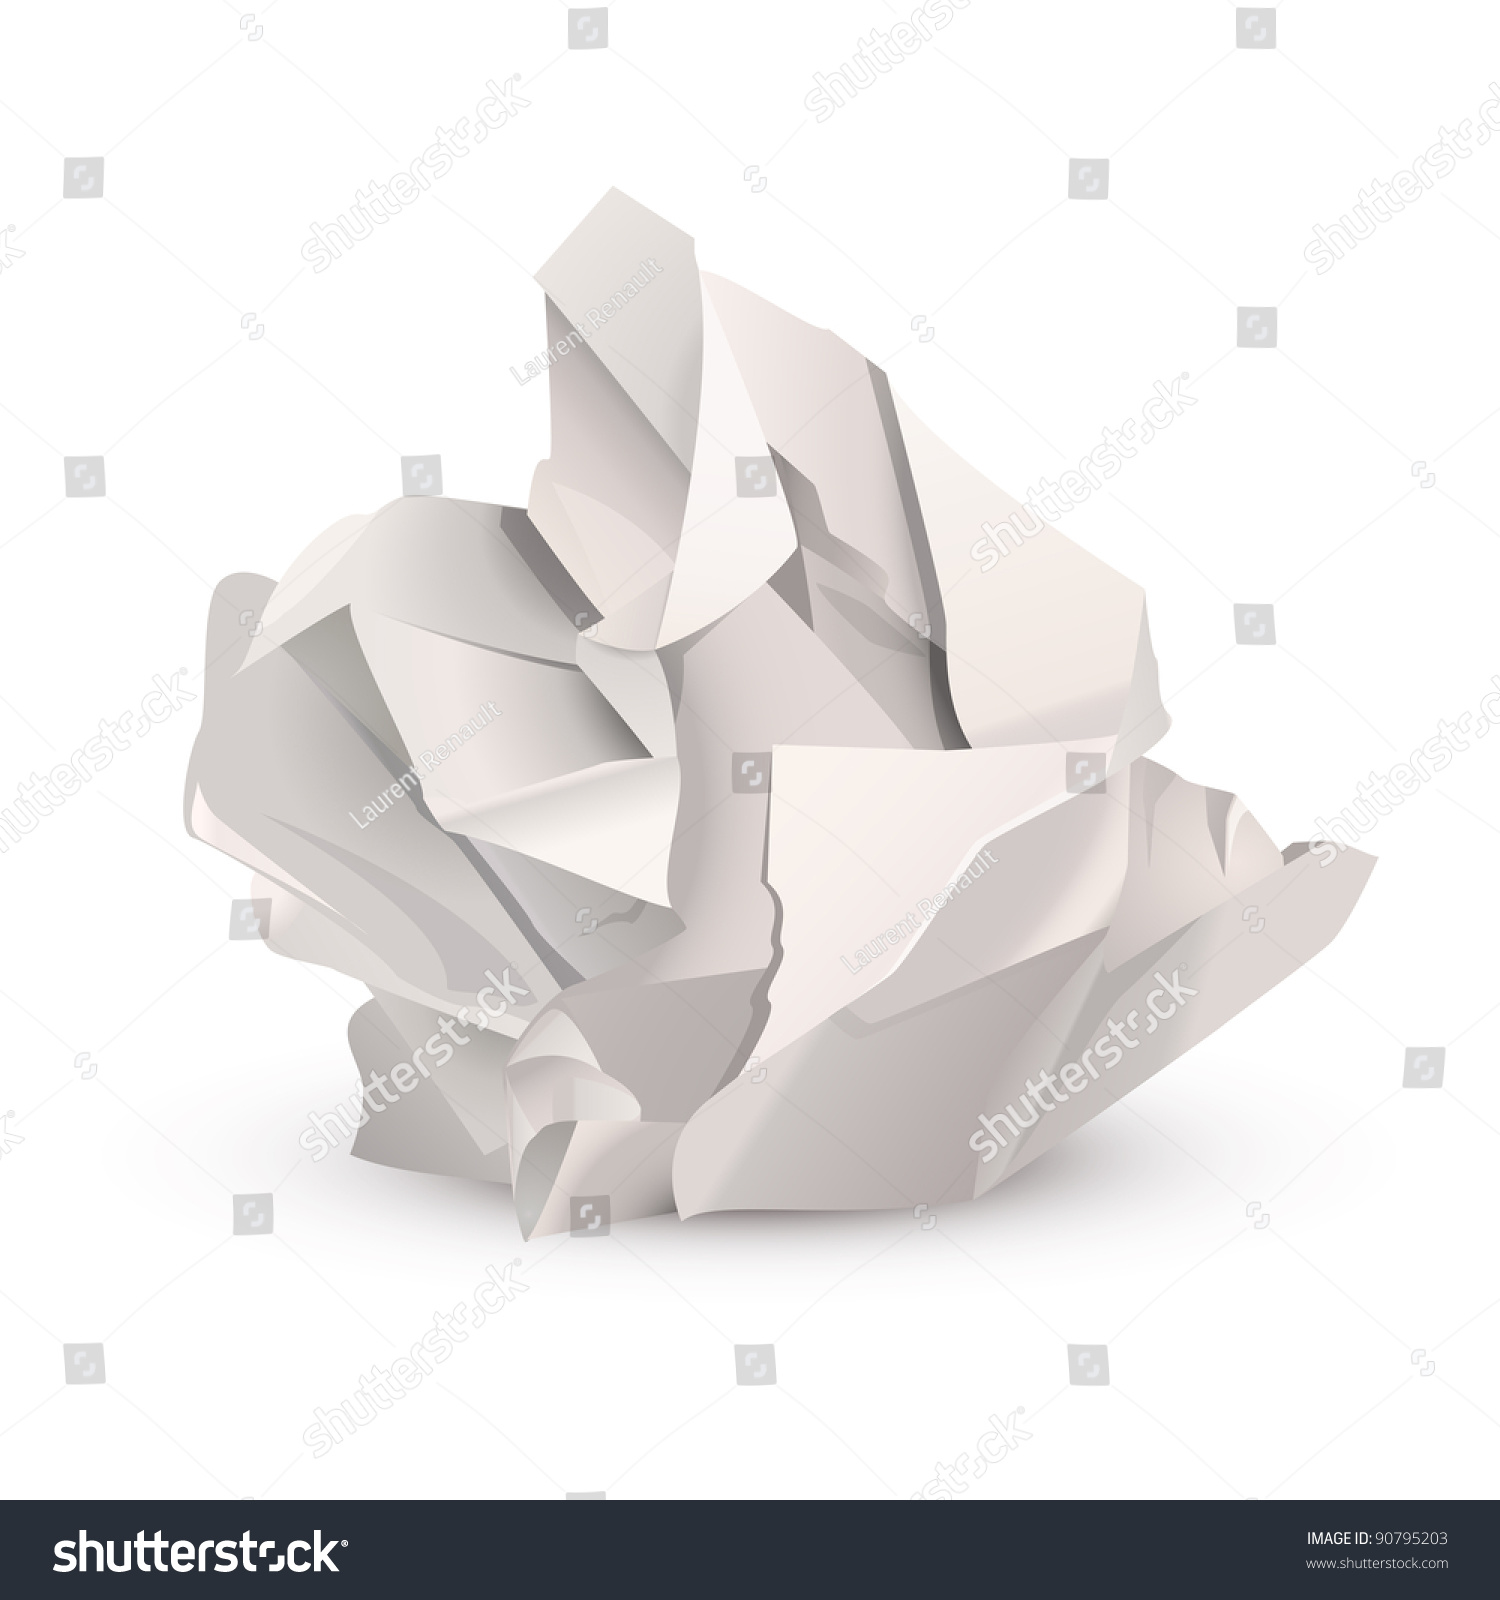 clipart crumpled paper - photo #19